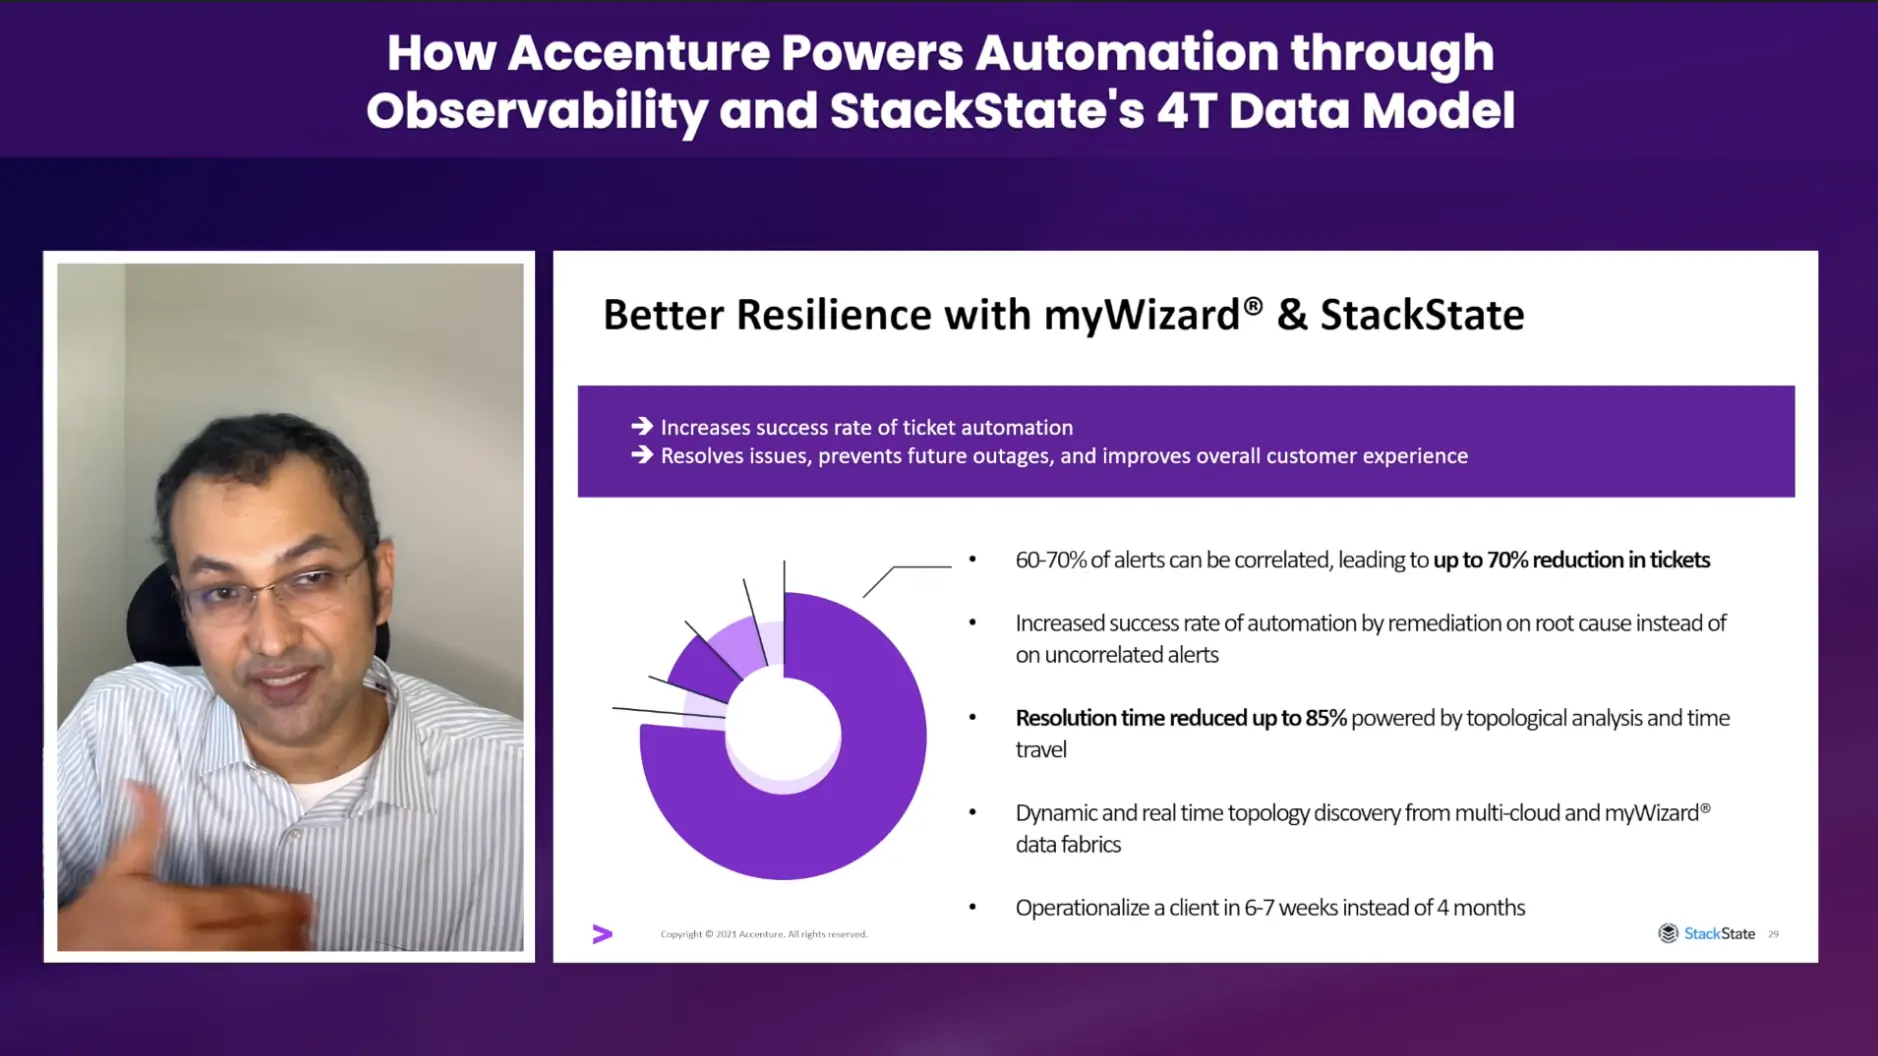 Better Resilience with myWizard & StackState